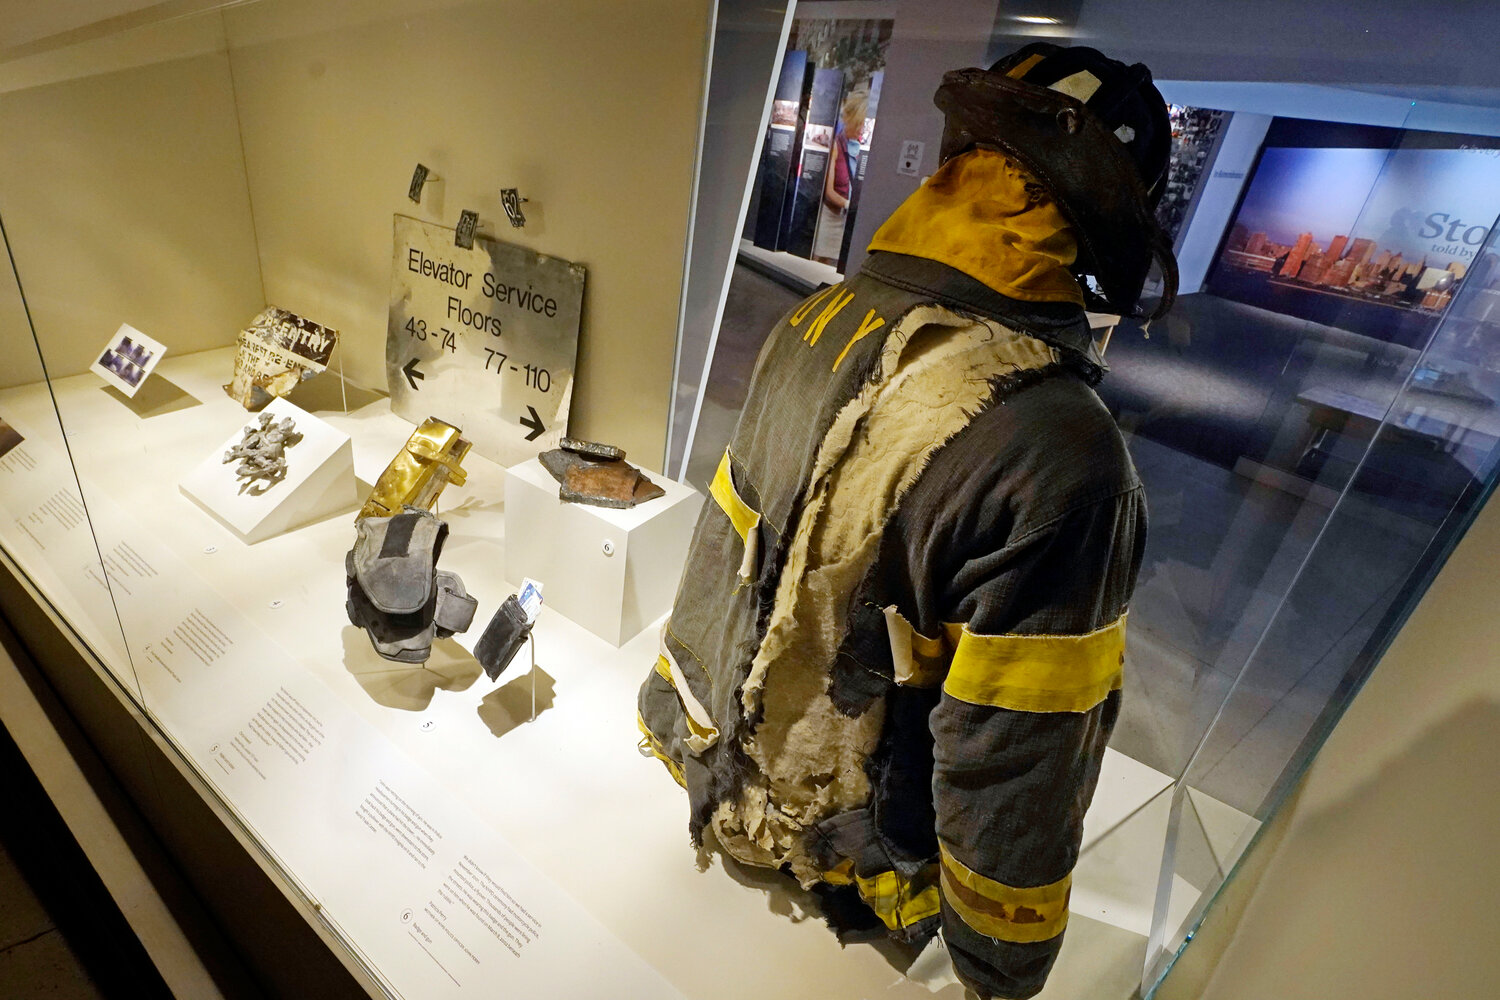 The helmet and turnout coat of a New City Fire Department firefighter, and other artifacts from the Sept, 11, 2001 attacks at the World Trade Center. The items were on display at the 9/11 Tribute Museum, which closed last year because of lack of funding. An exhibition at the New York City Fire Museum on view through the end of the month showcases some of the photographs, personal testimony and artifacts from the original displays on Greenwich Street.